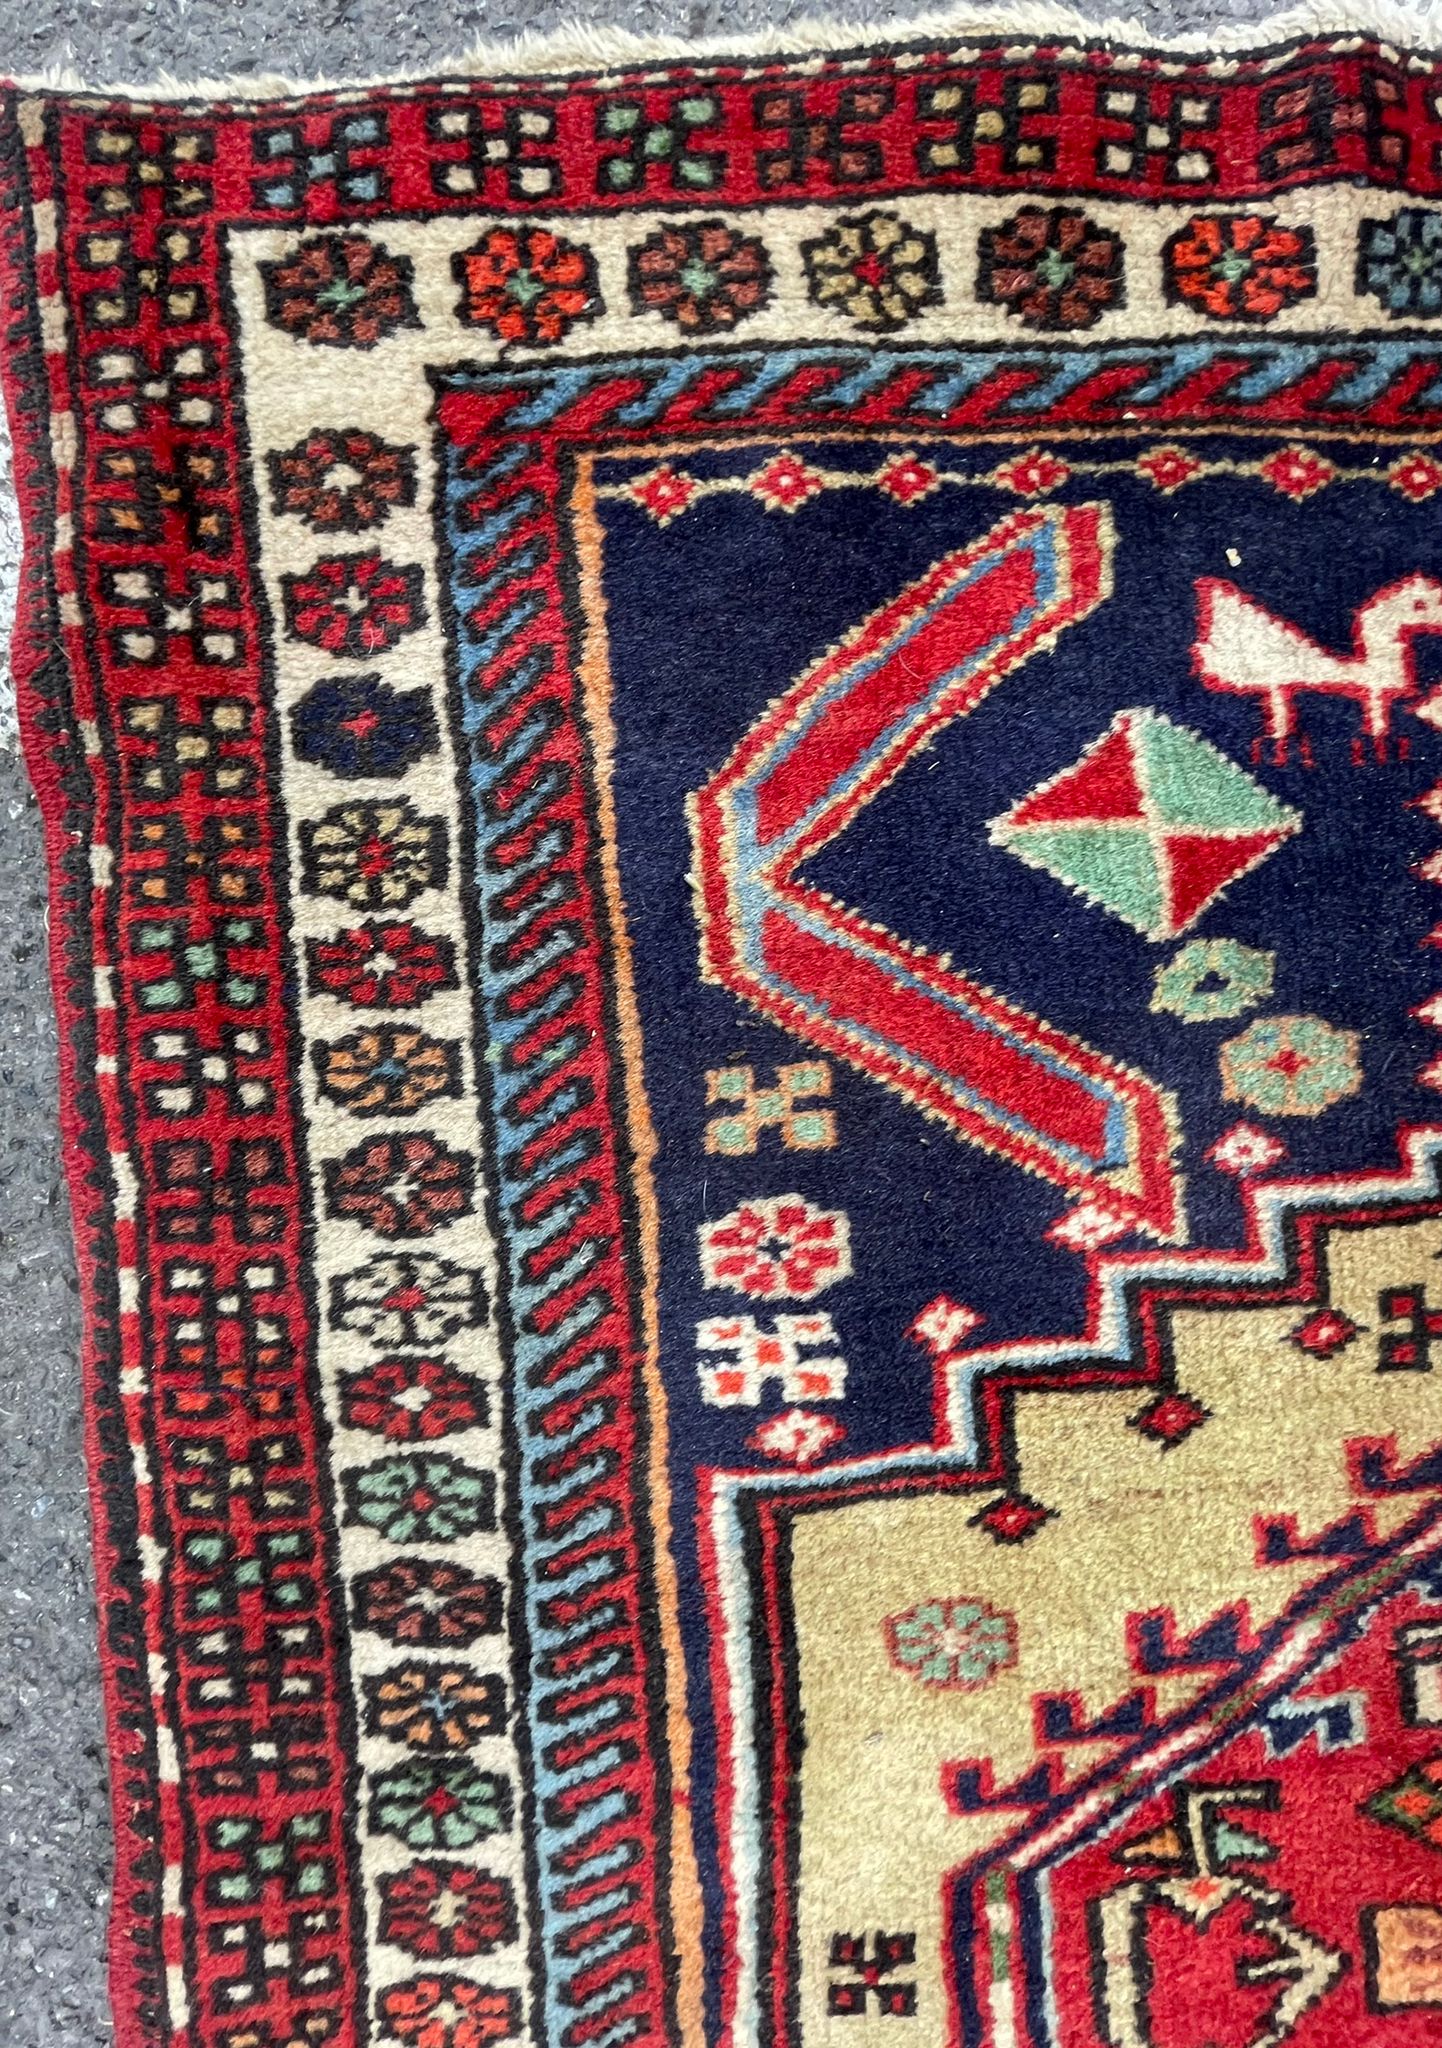 VINTAGE MID 20TH CENTURY PERSIAN ISLAMIC MALAYER RUNNER RUG - Image 3 of 4